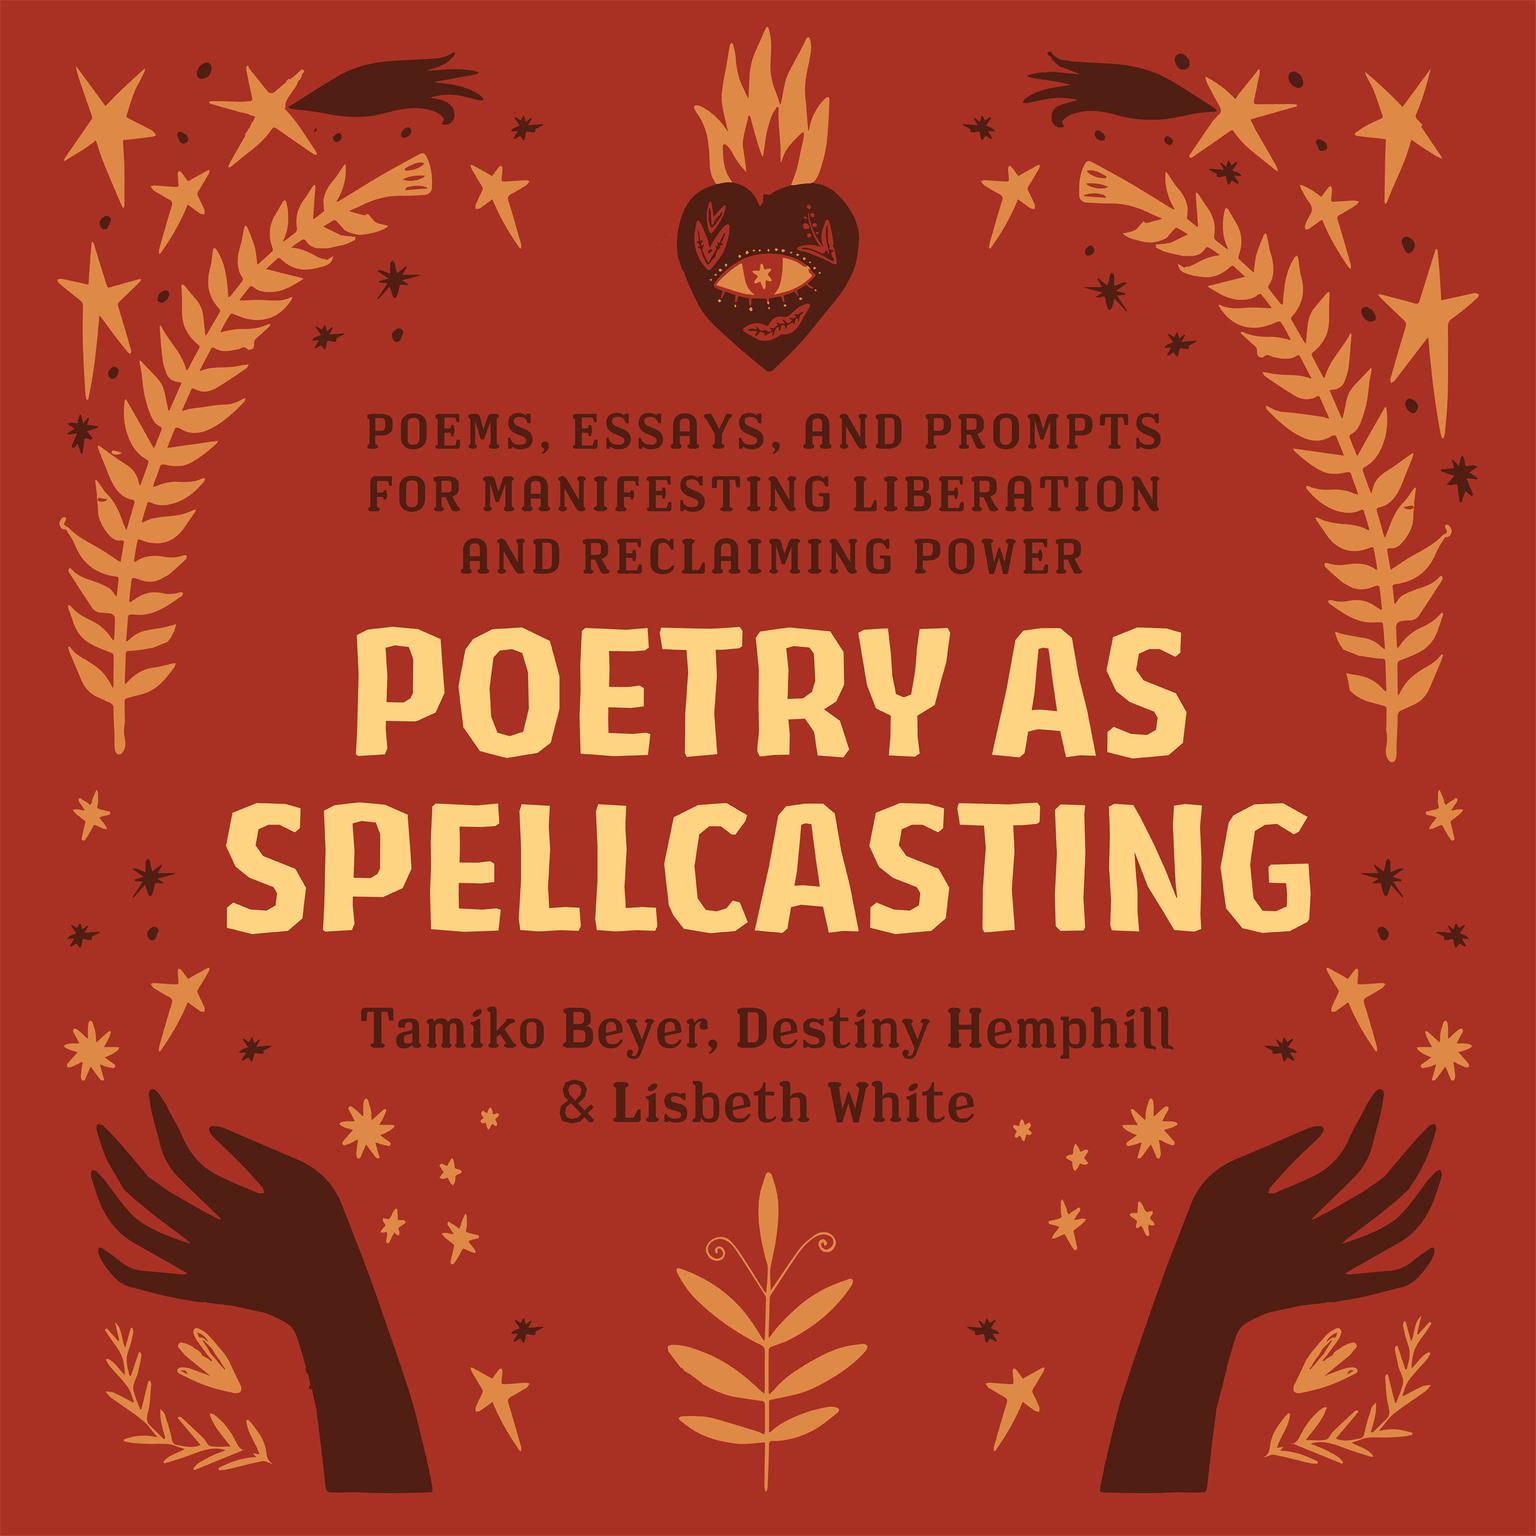 Poetry as Spellcasting: Poems, Essays, and Prompts for Manifesting Liberation and Reclaiming Power Audiobook, by Destiny Hemphill